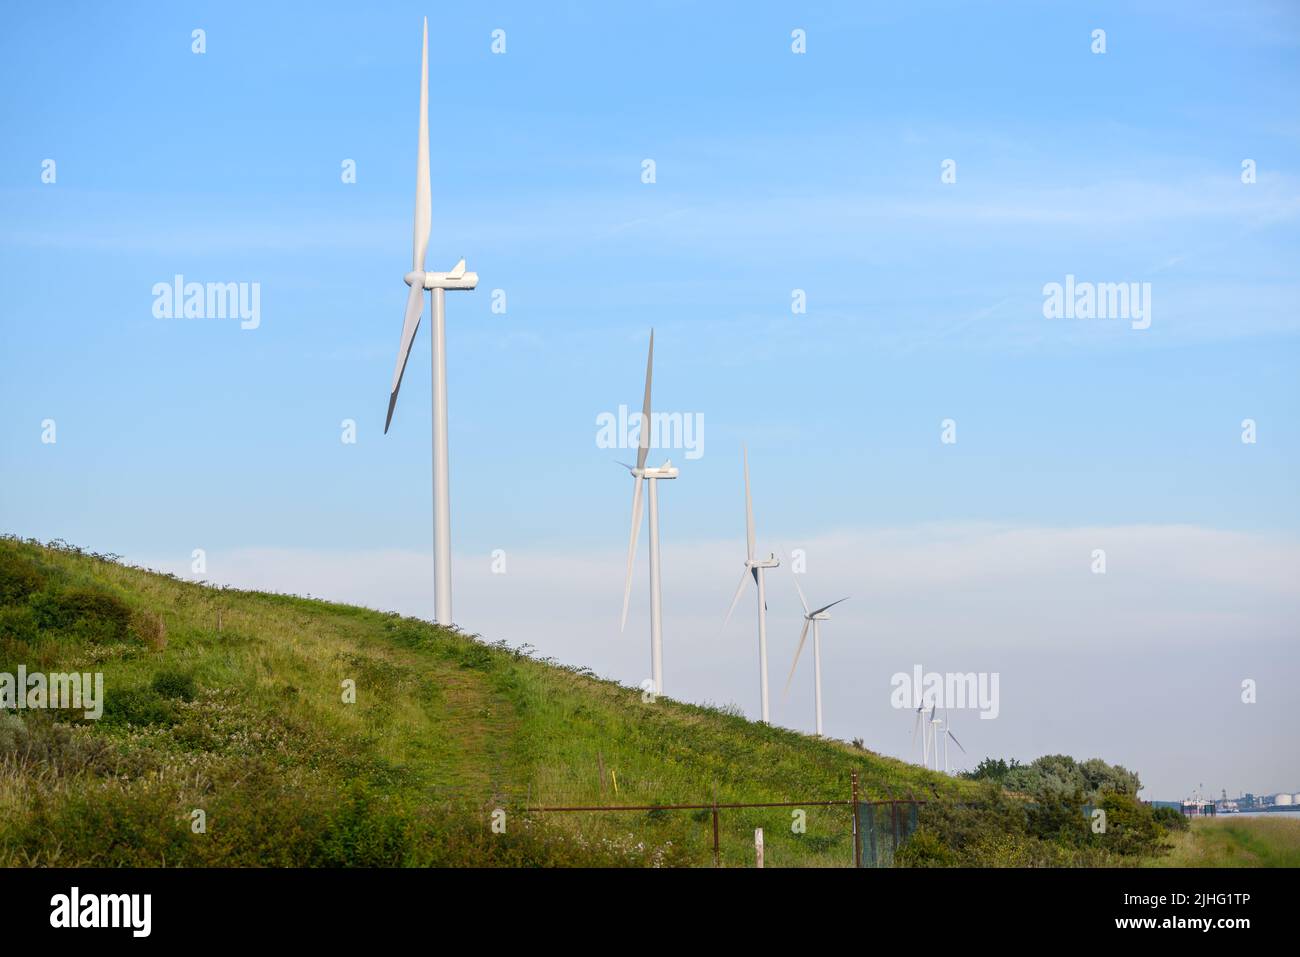 Row of wind turbines against clear sky in summer Stock Photo